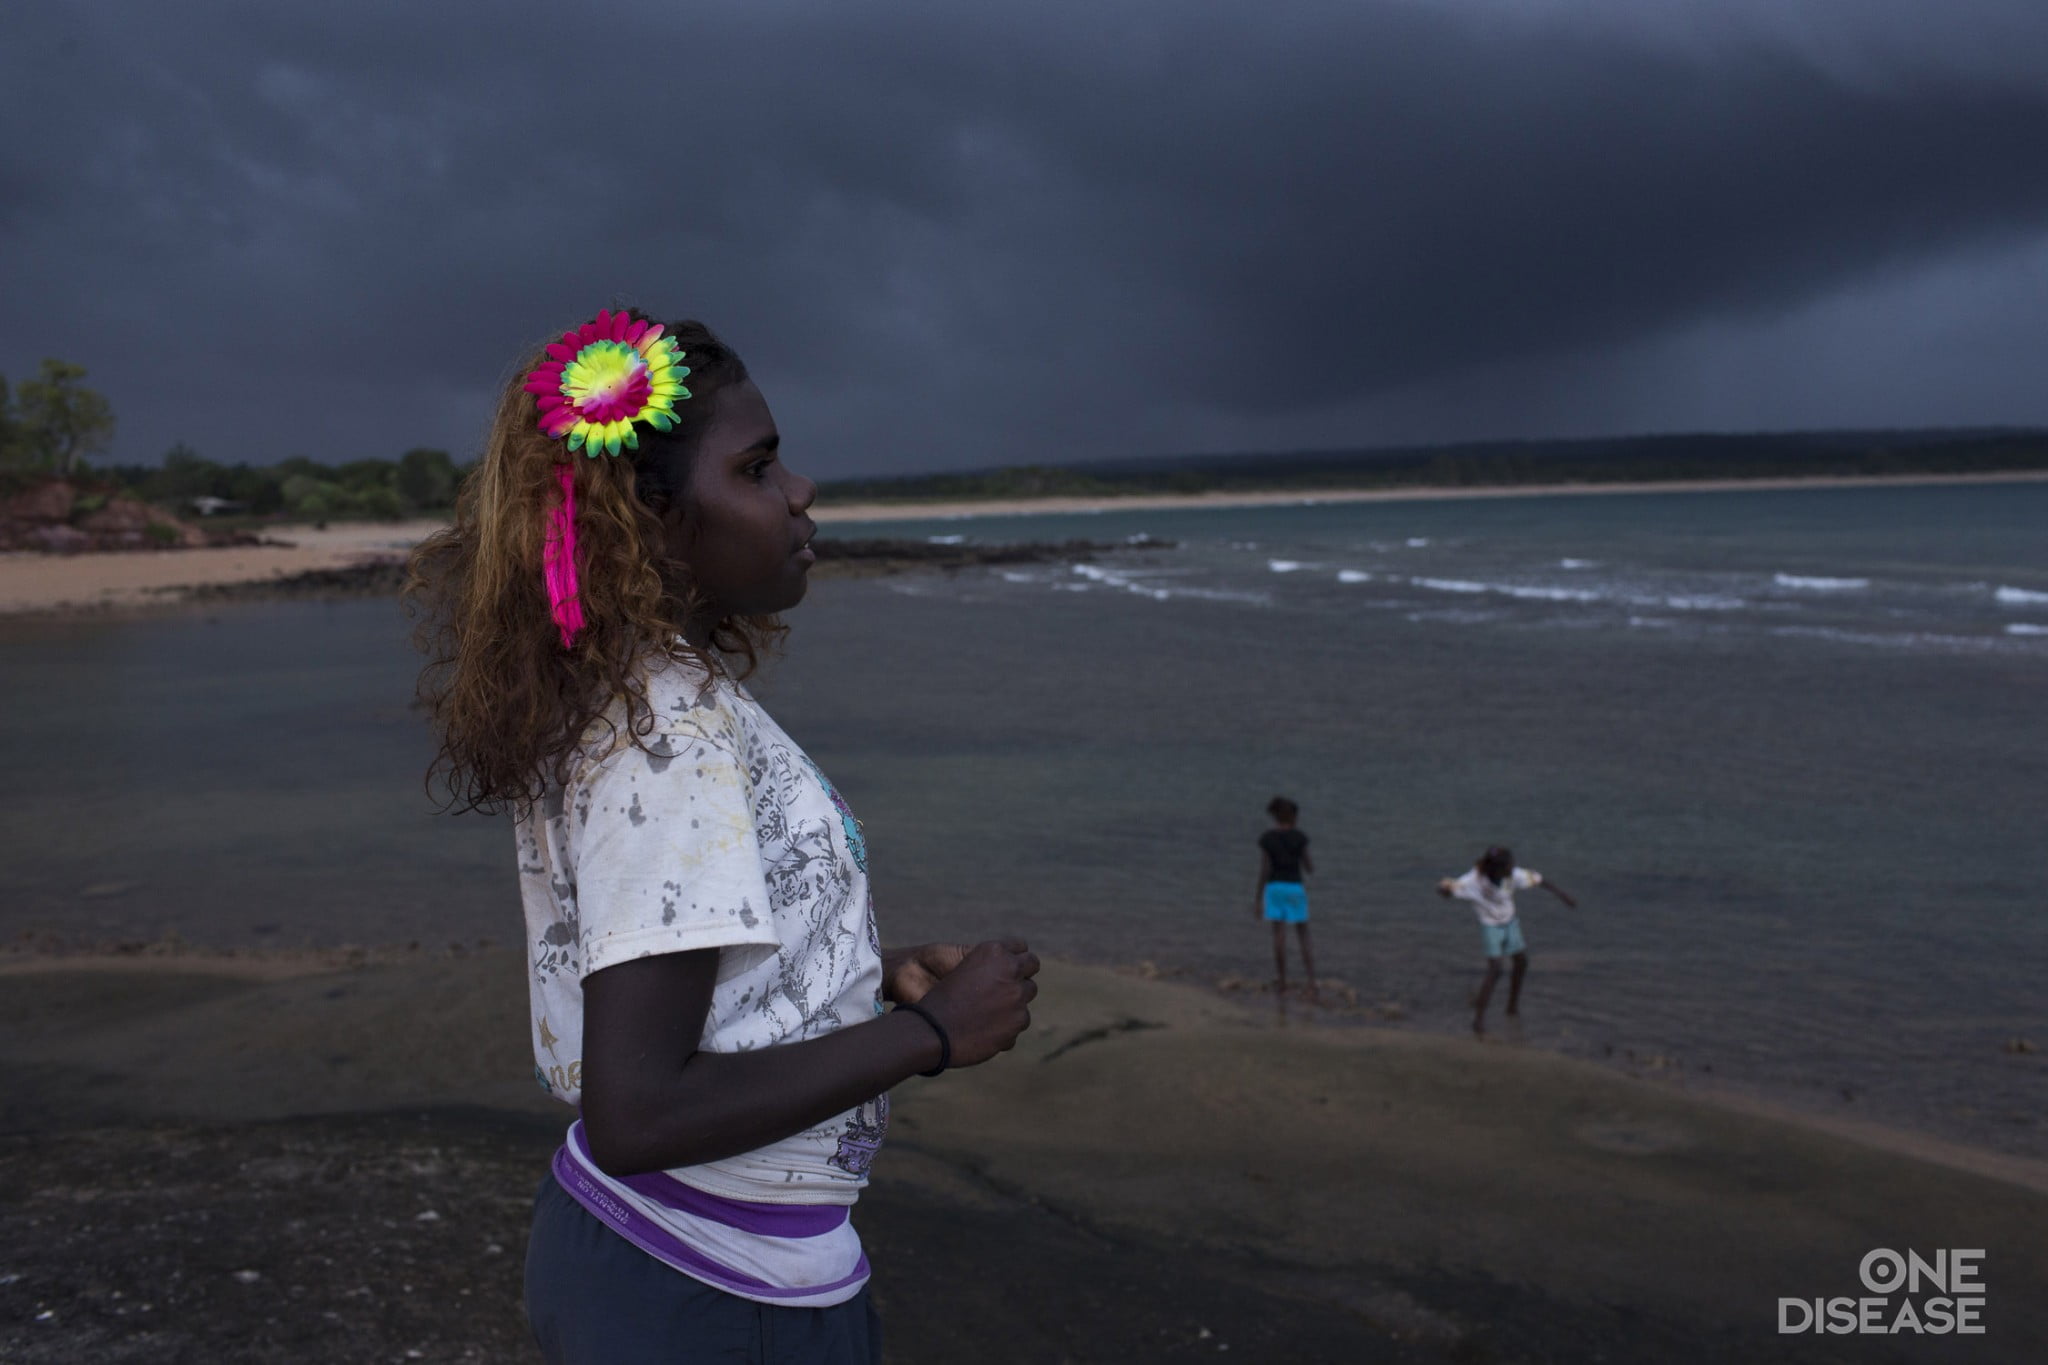 Young Aboriginal girl with bright flower in her hair looking out towards the ocean